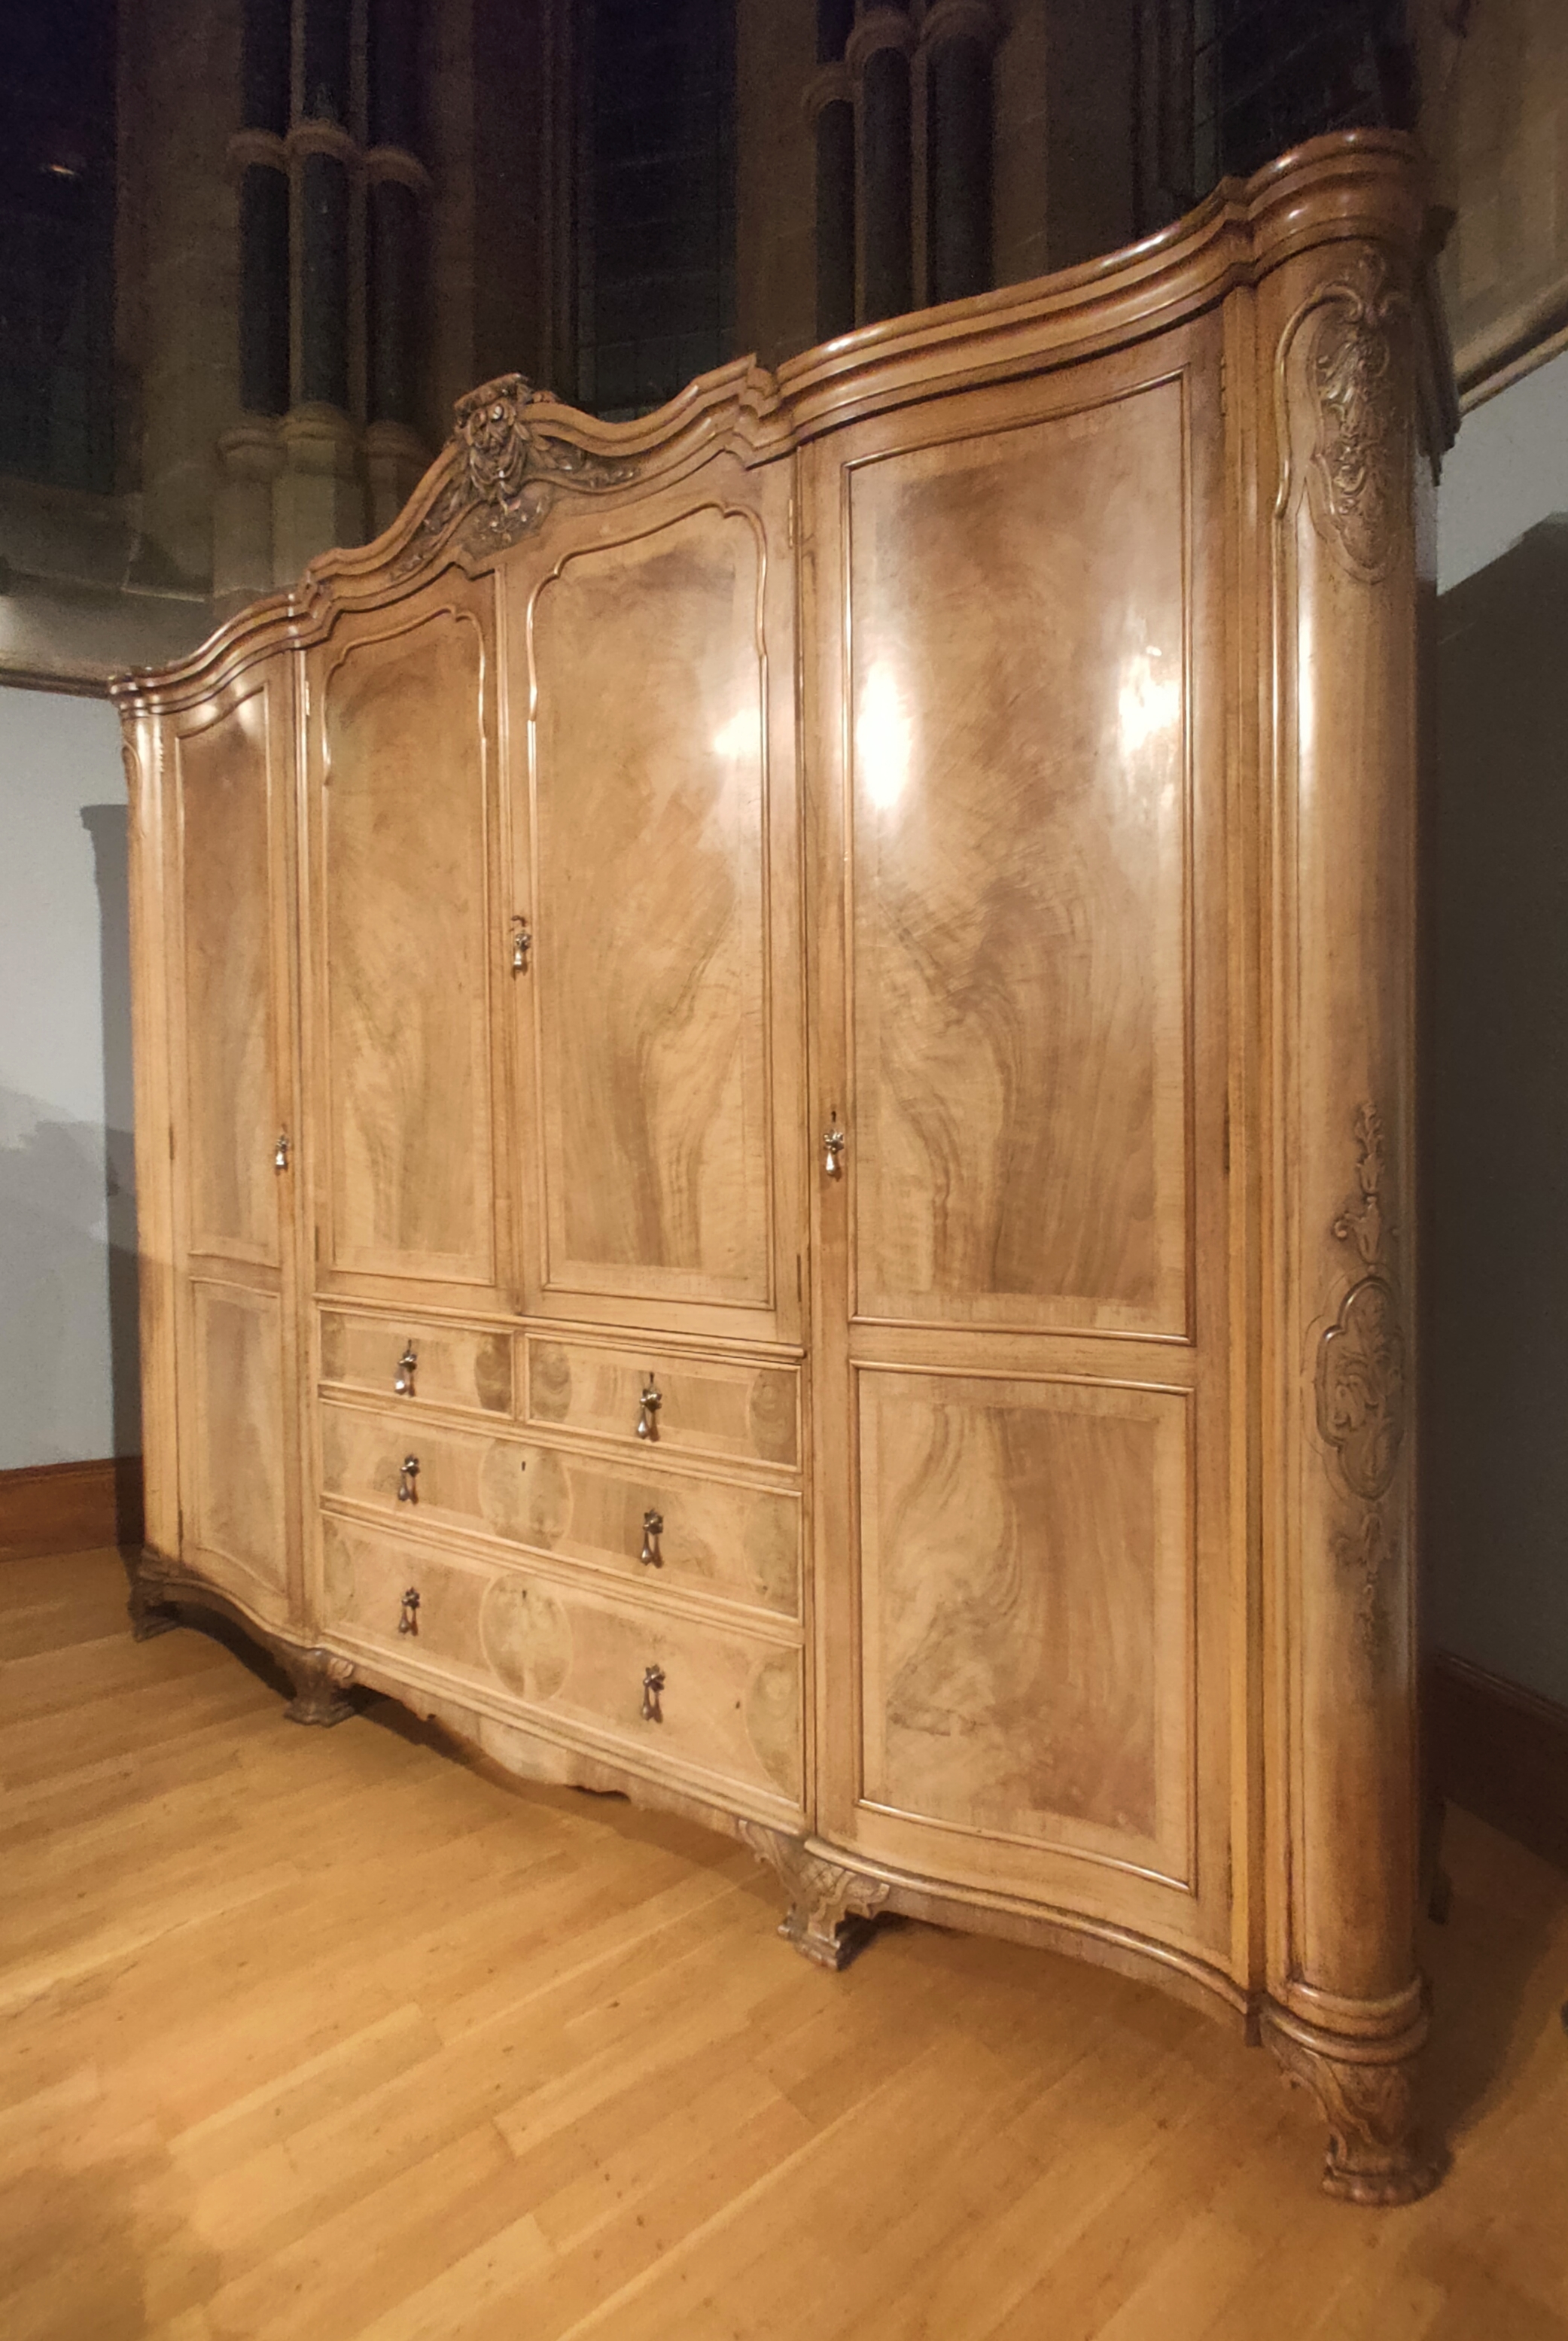 Whytock & Reid Walnut Wardrobe - built for Coco Chanel in Rosehall 1926 - Image 5 of 14